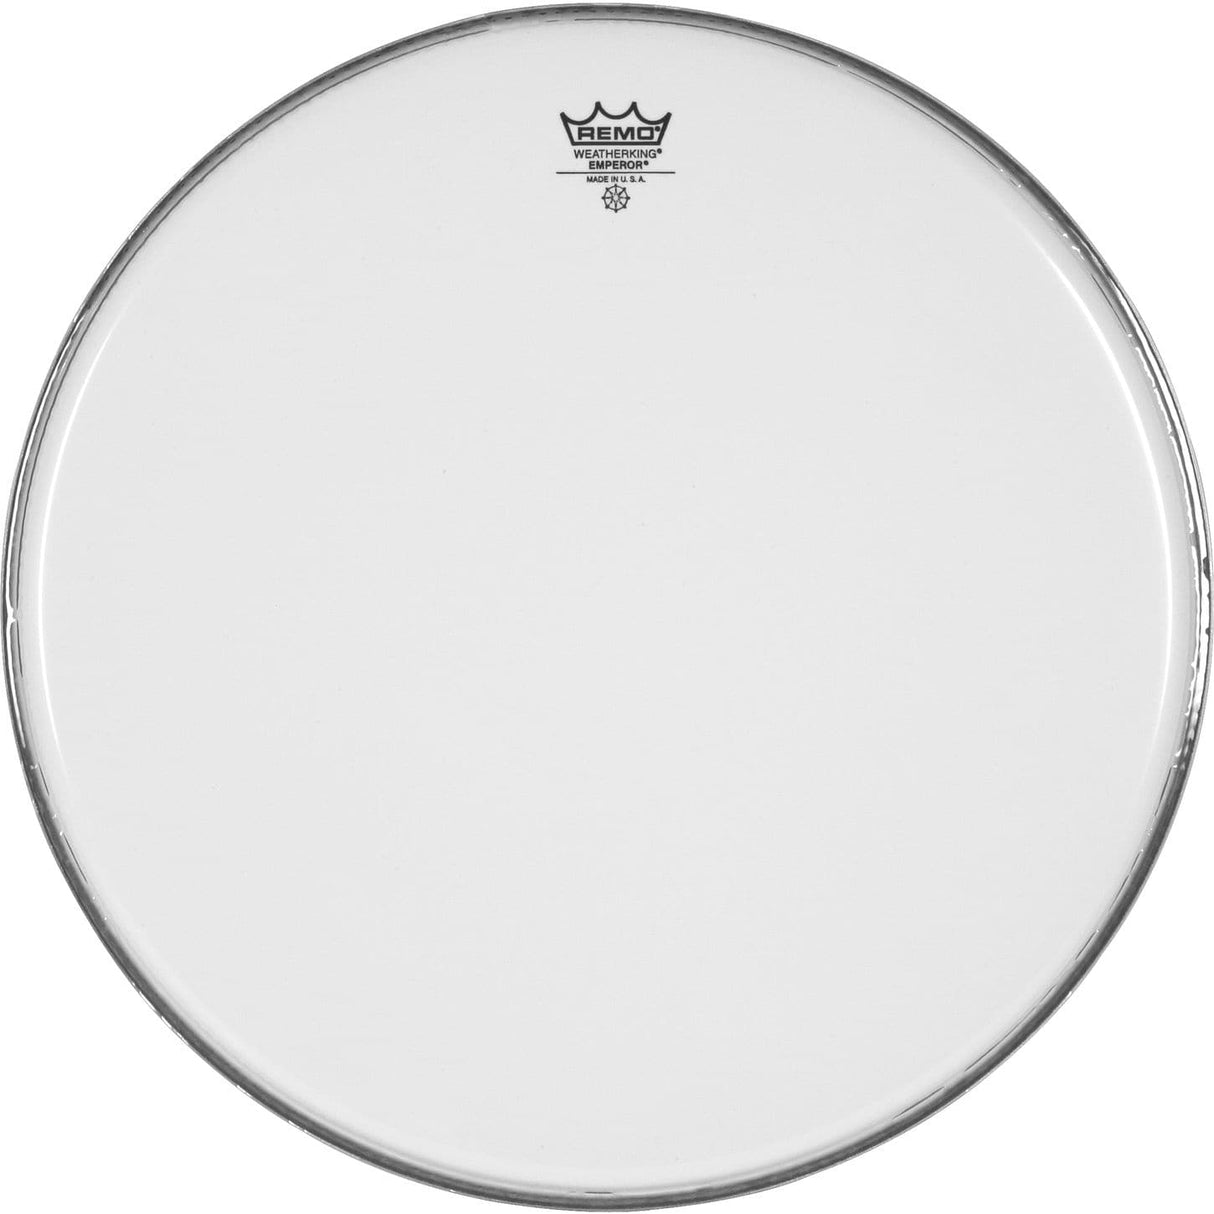 Remo Coated Smooth White Emperor 6 Inch Drum Head